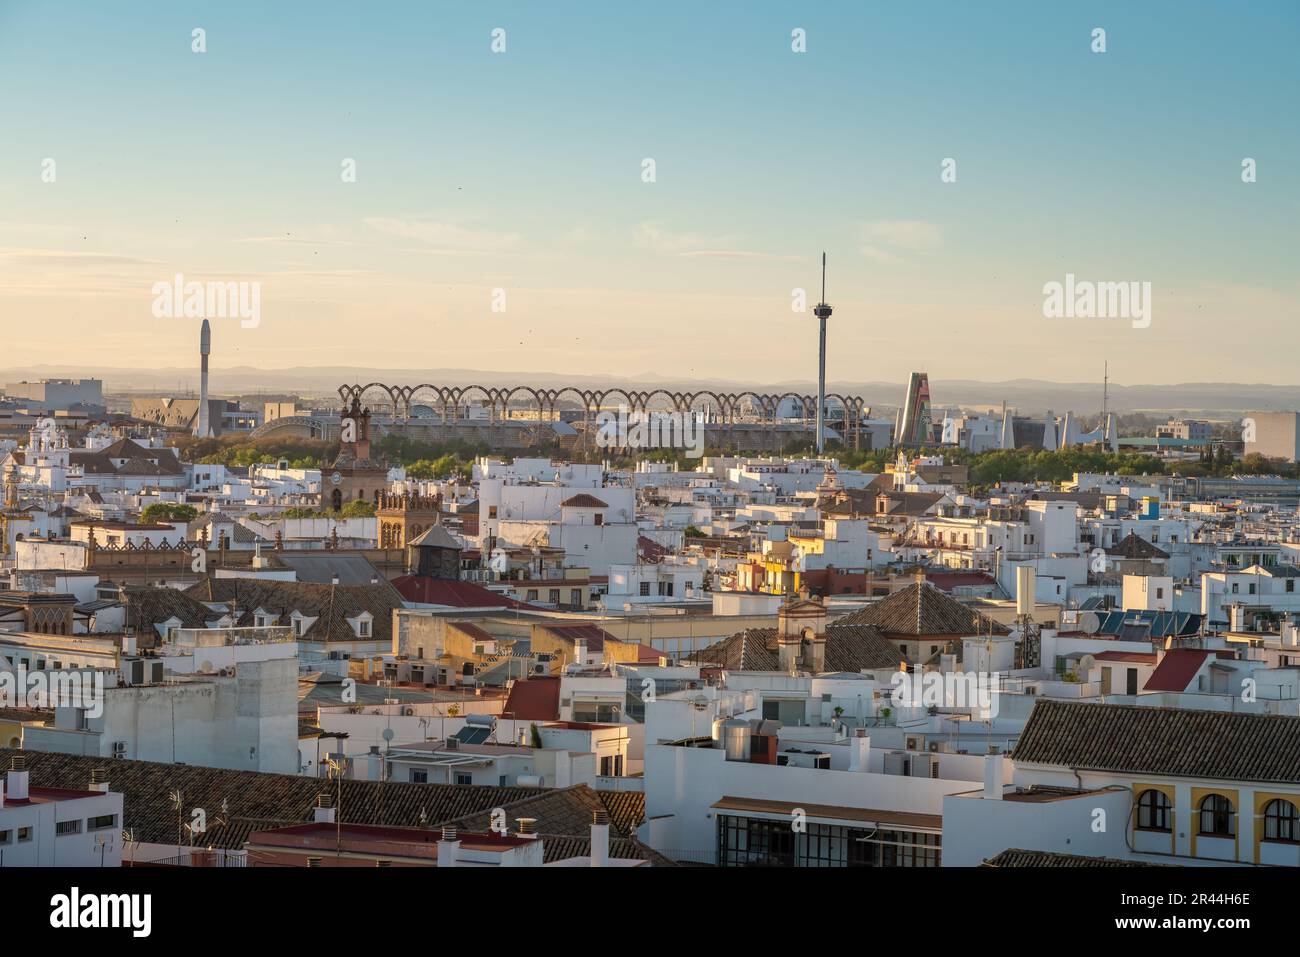 Seville Skyline with La Cartuja Island - Seville, Andalusia, Spain Stock Photo